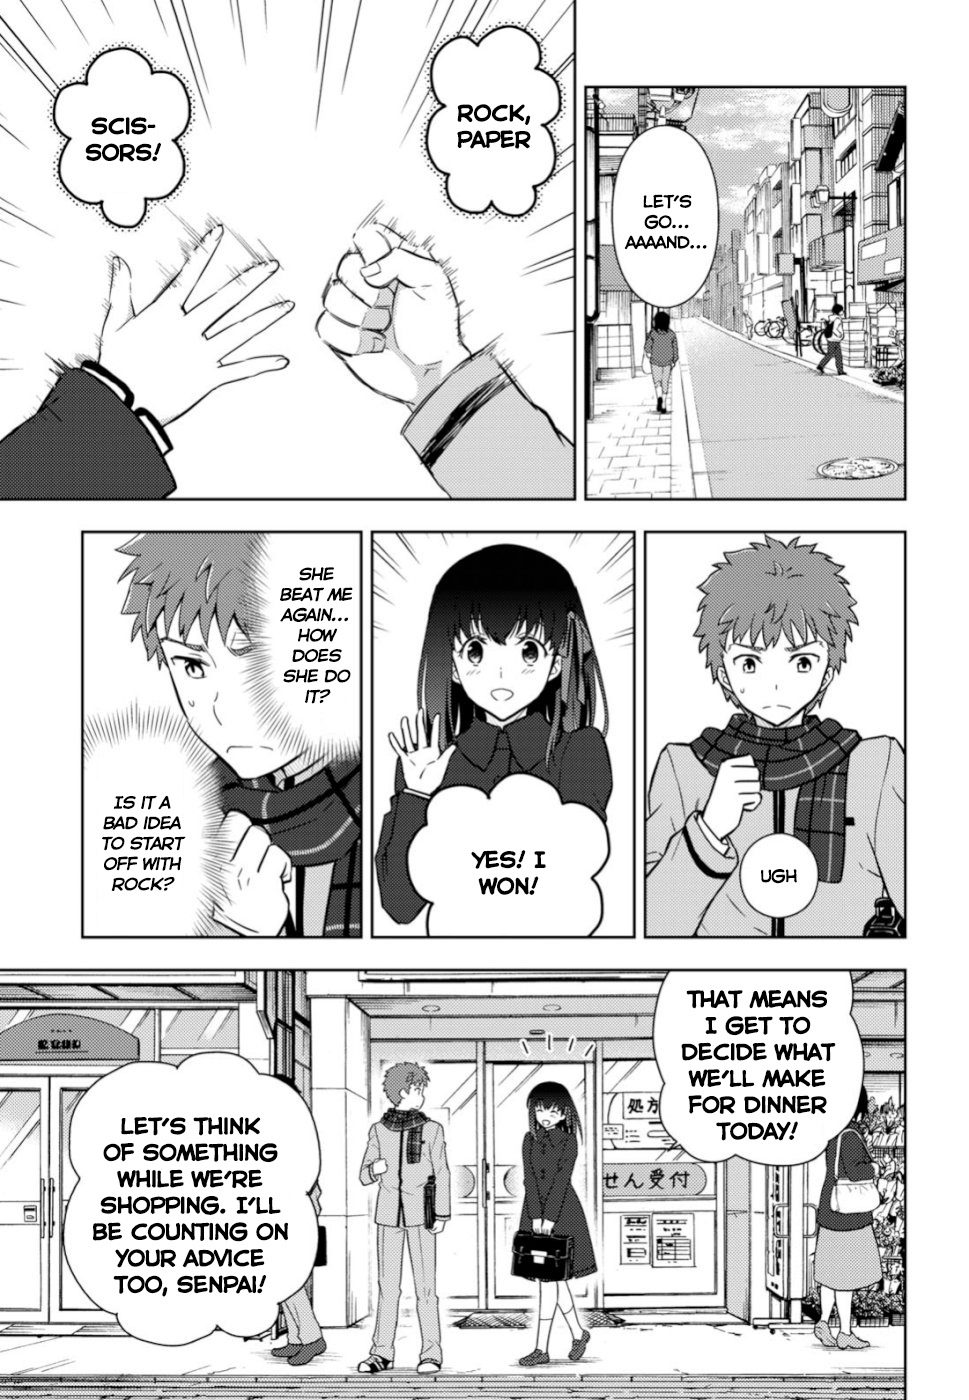 Fate/stay night: Heaven's Feel Vol. 8 Ch. 50 Day 8 / Truth (1)